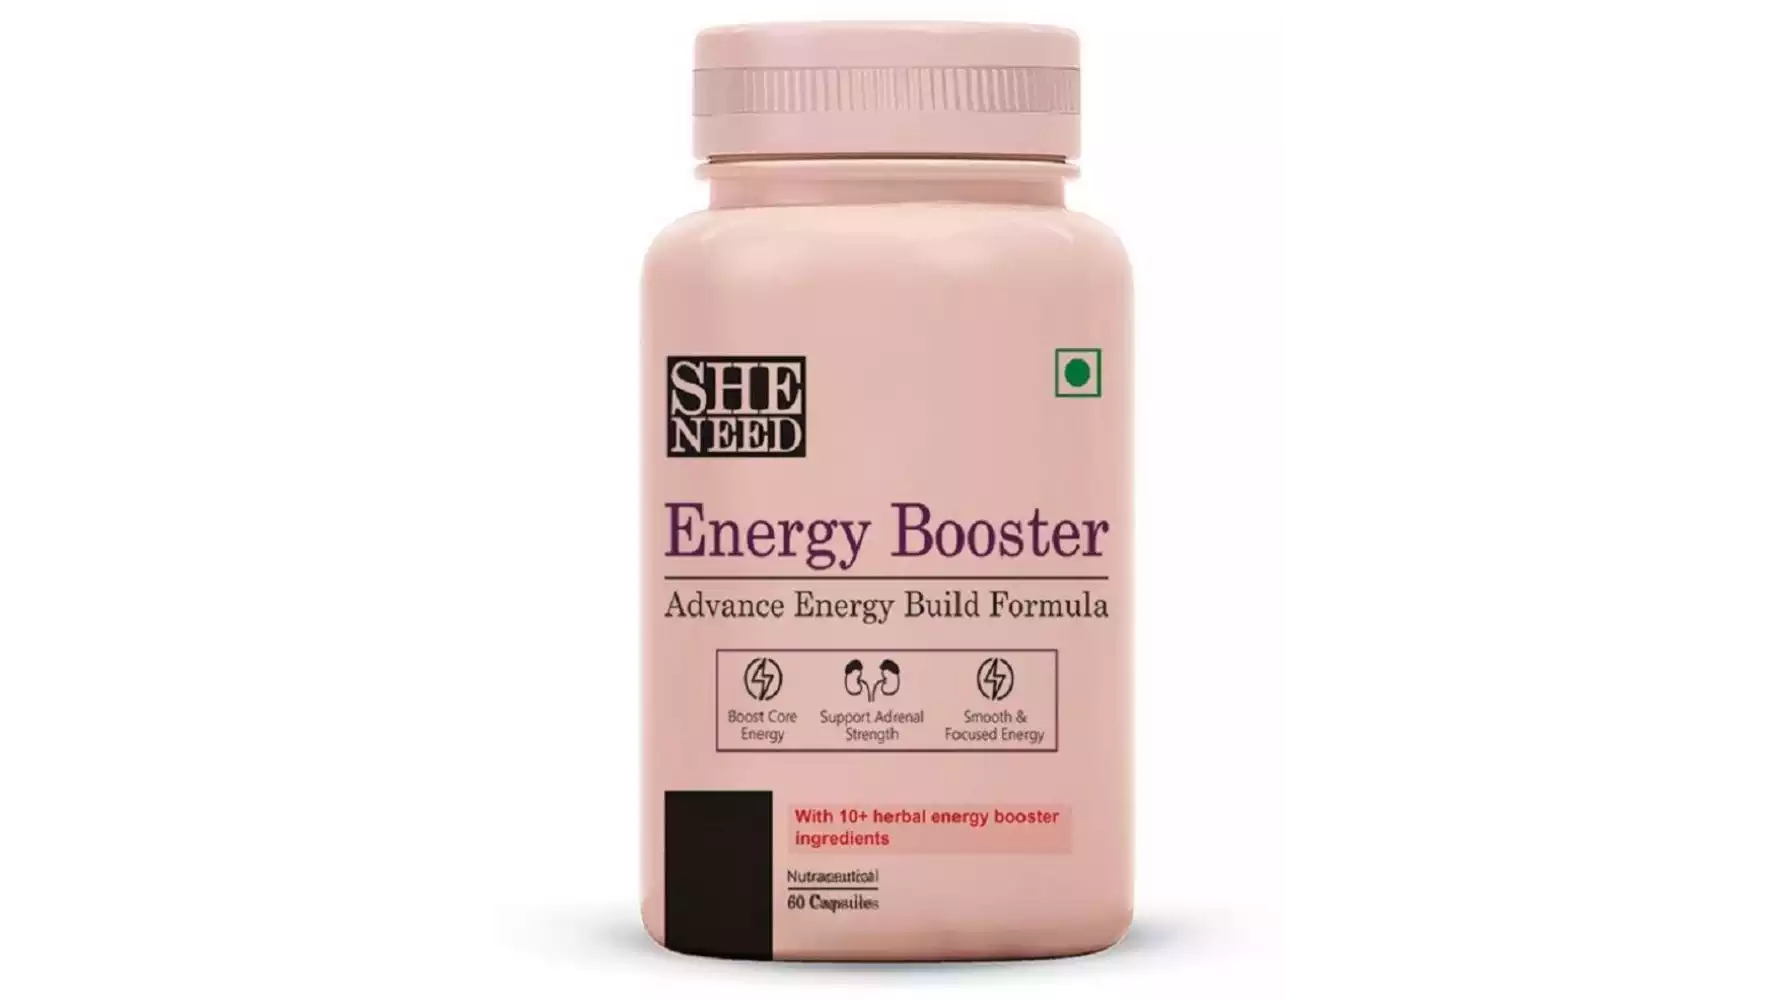 SheNeed Energy Booster Capsules (60caps)